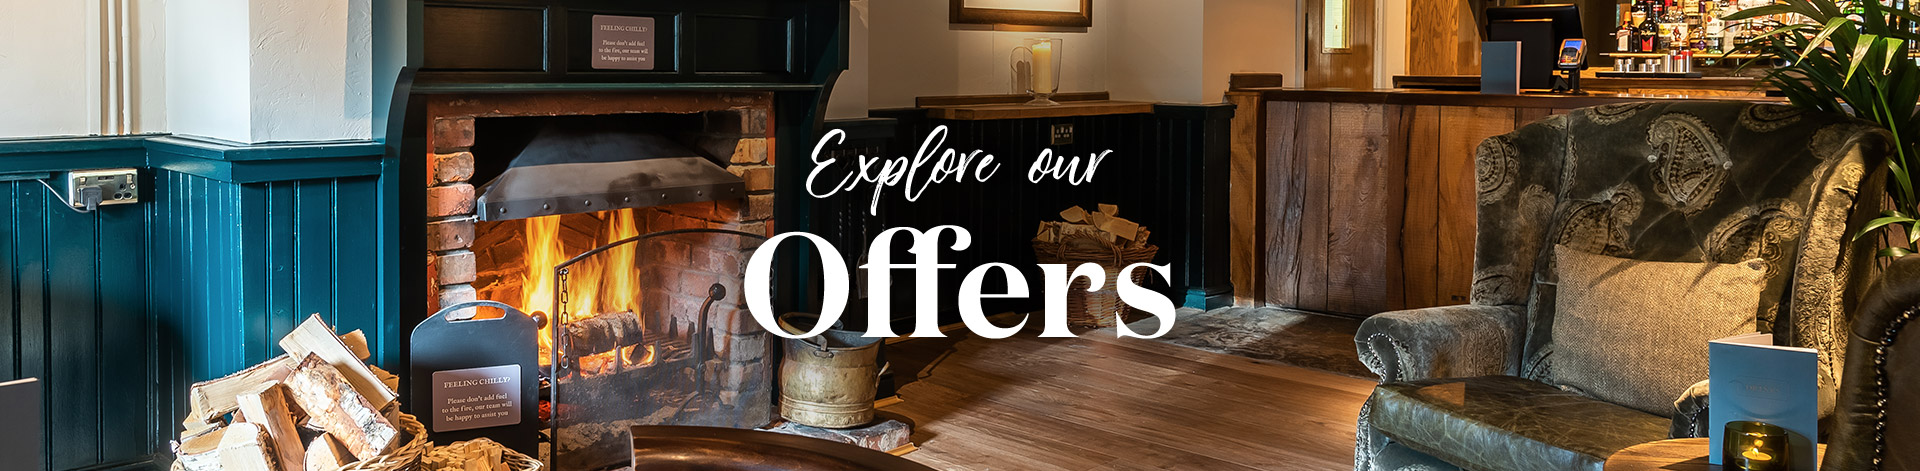 Our latest offers at The Roundhay Fox